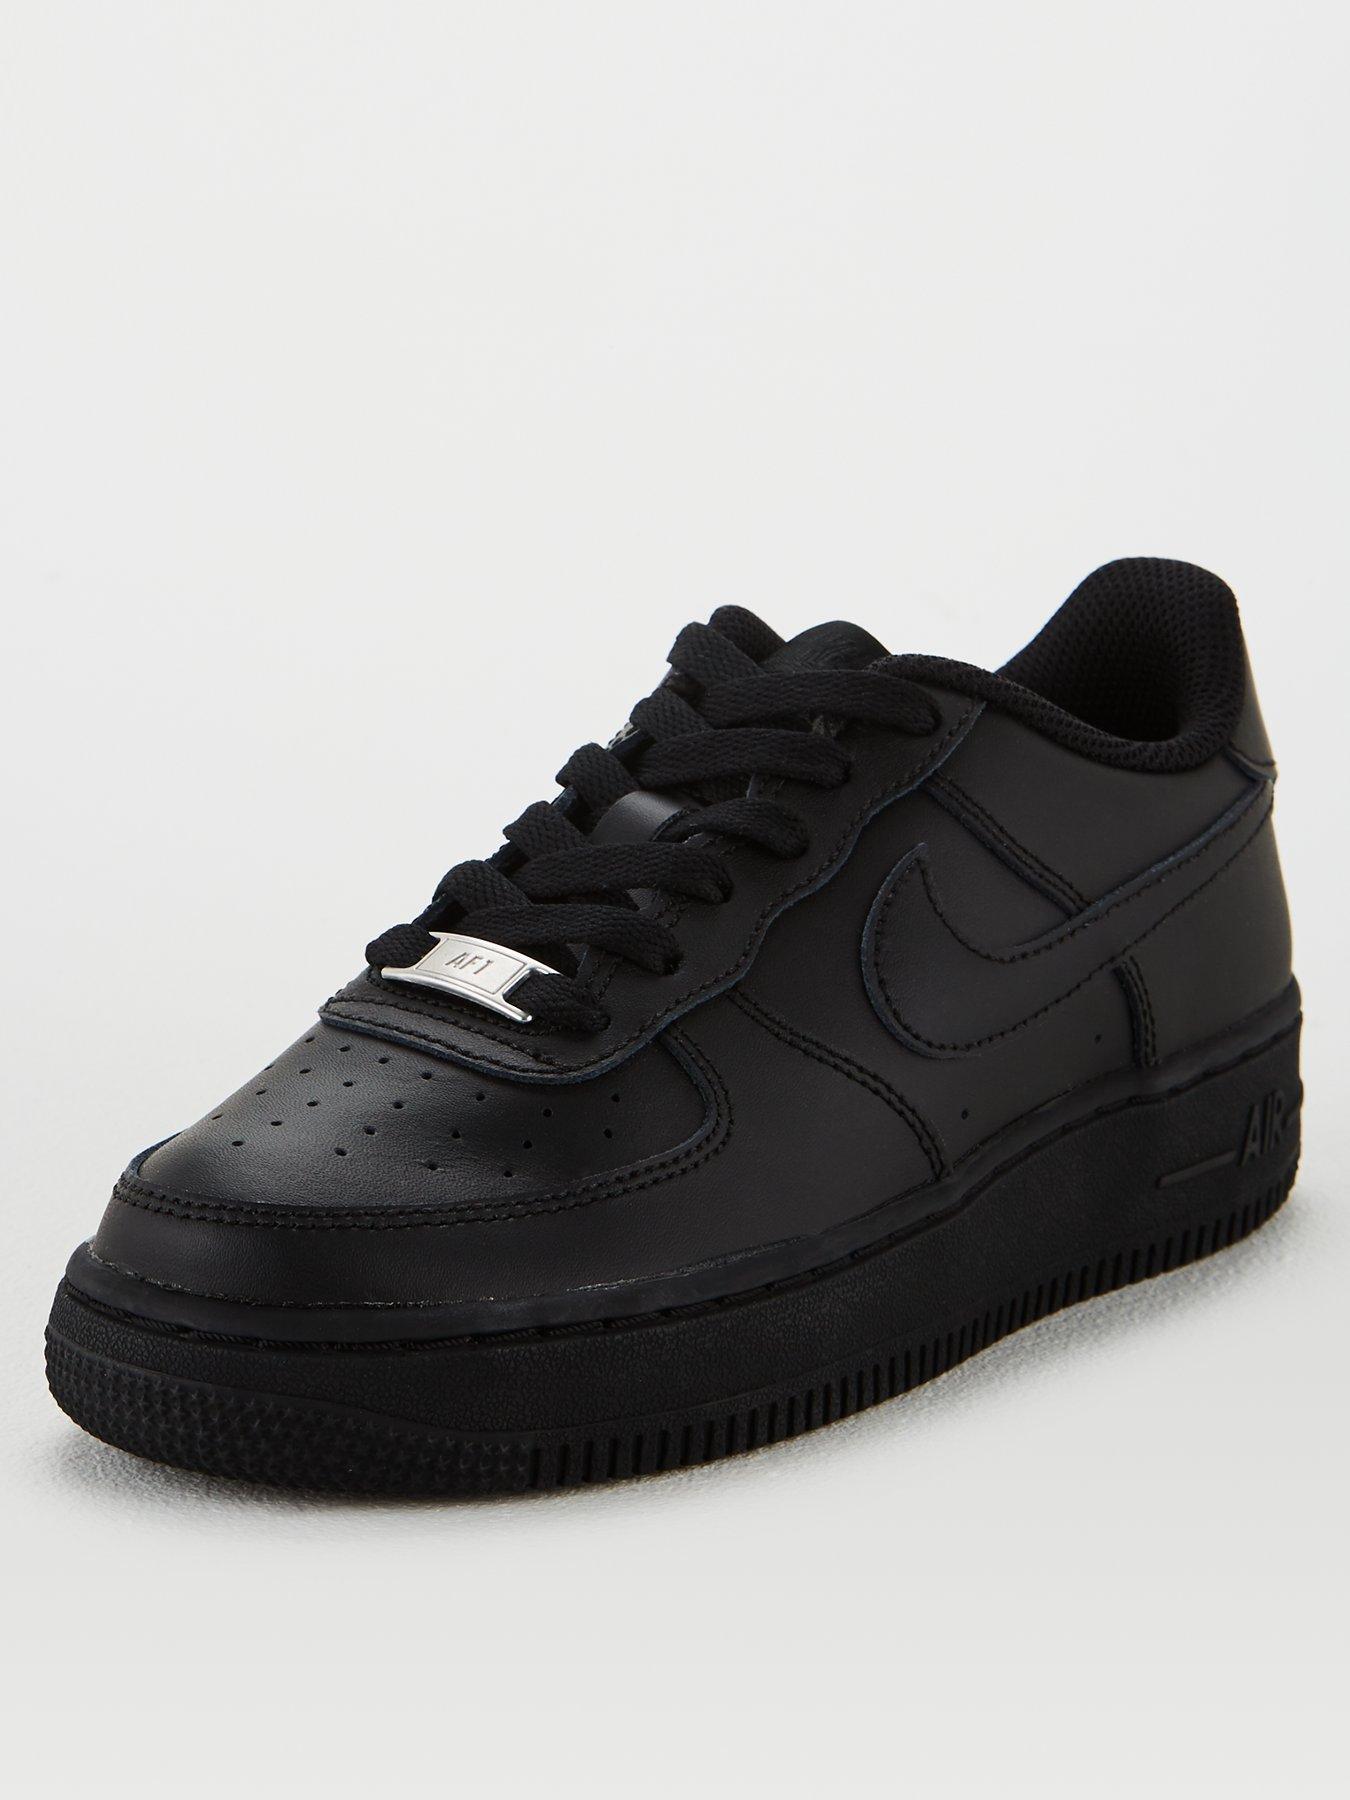 air force 1 junior size 6